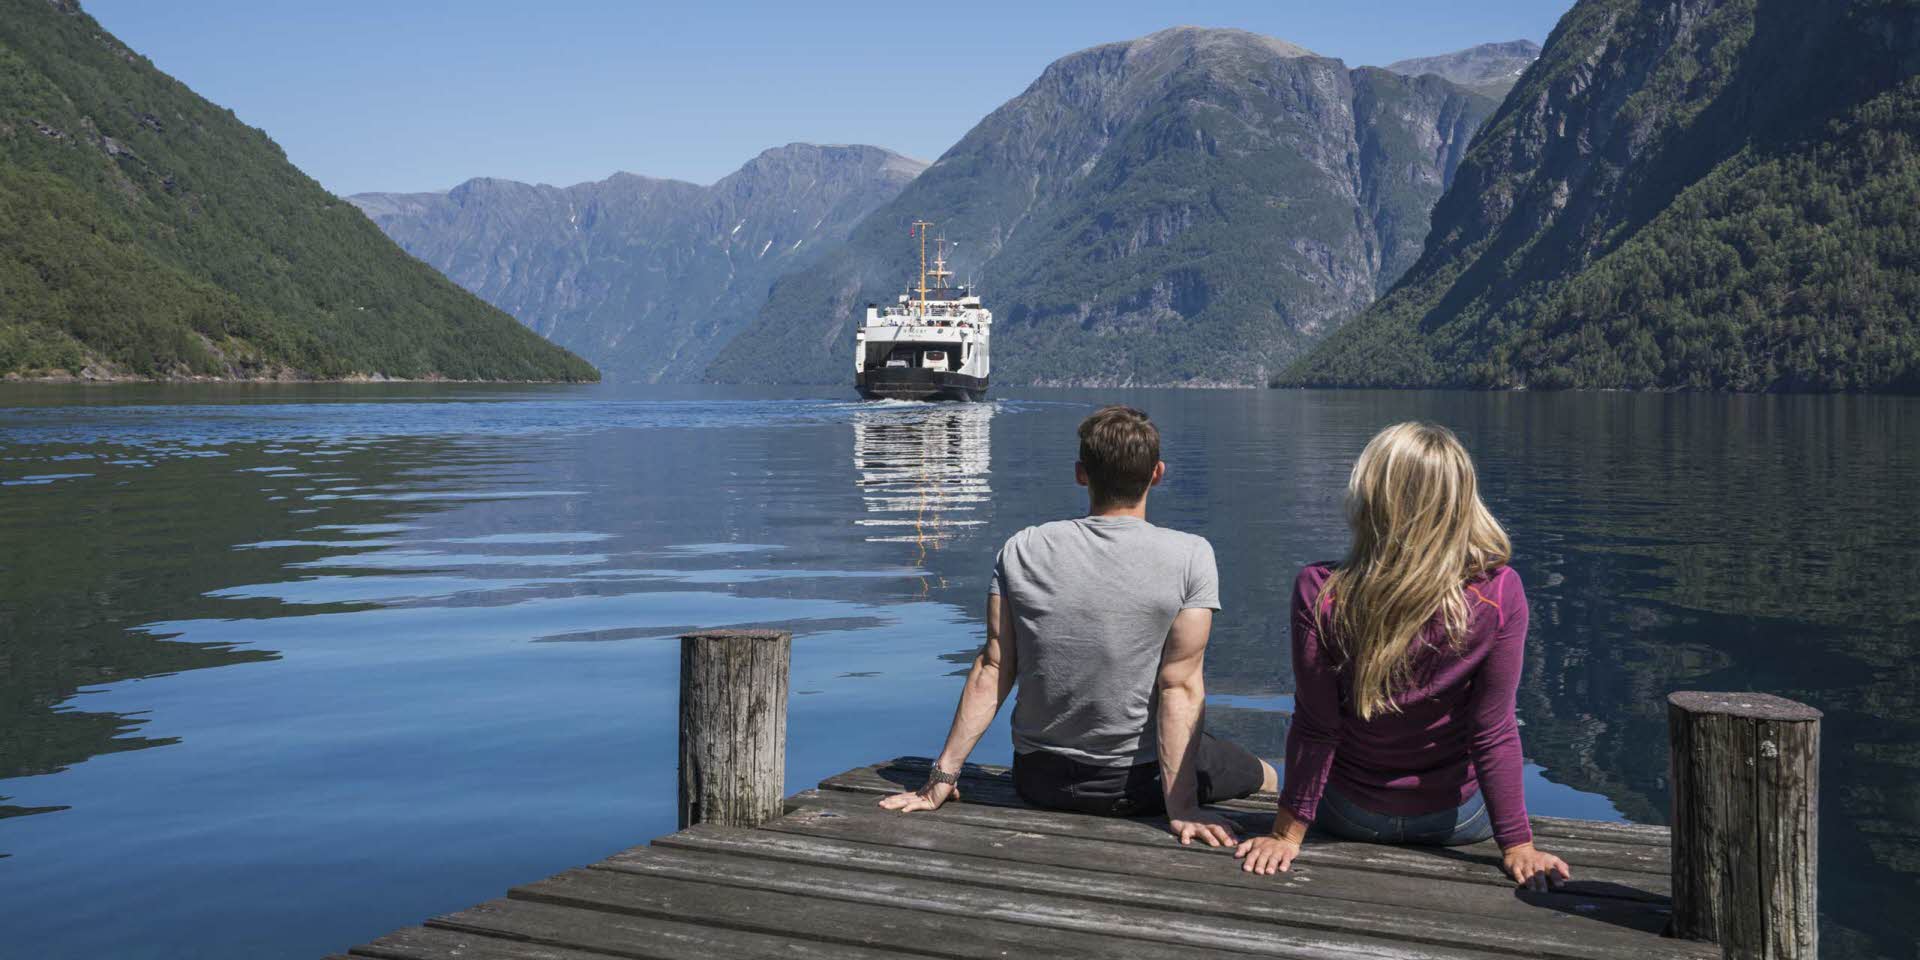 Young couple sitting on the edge of wooden pier in Geirangerfjord watching tourist ferry sailing through the fjord landscape